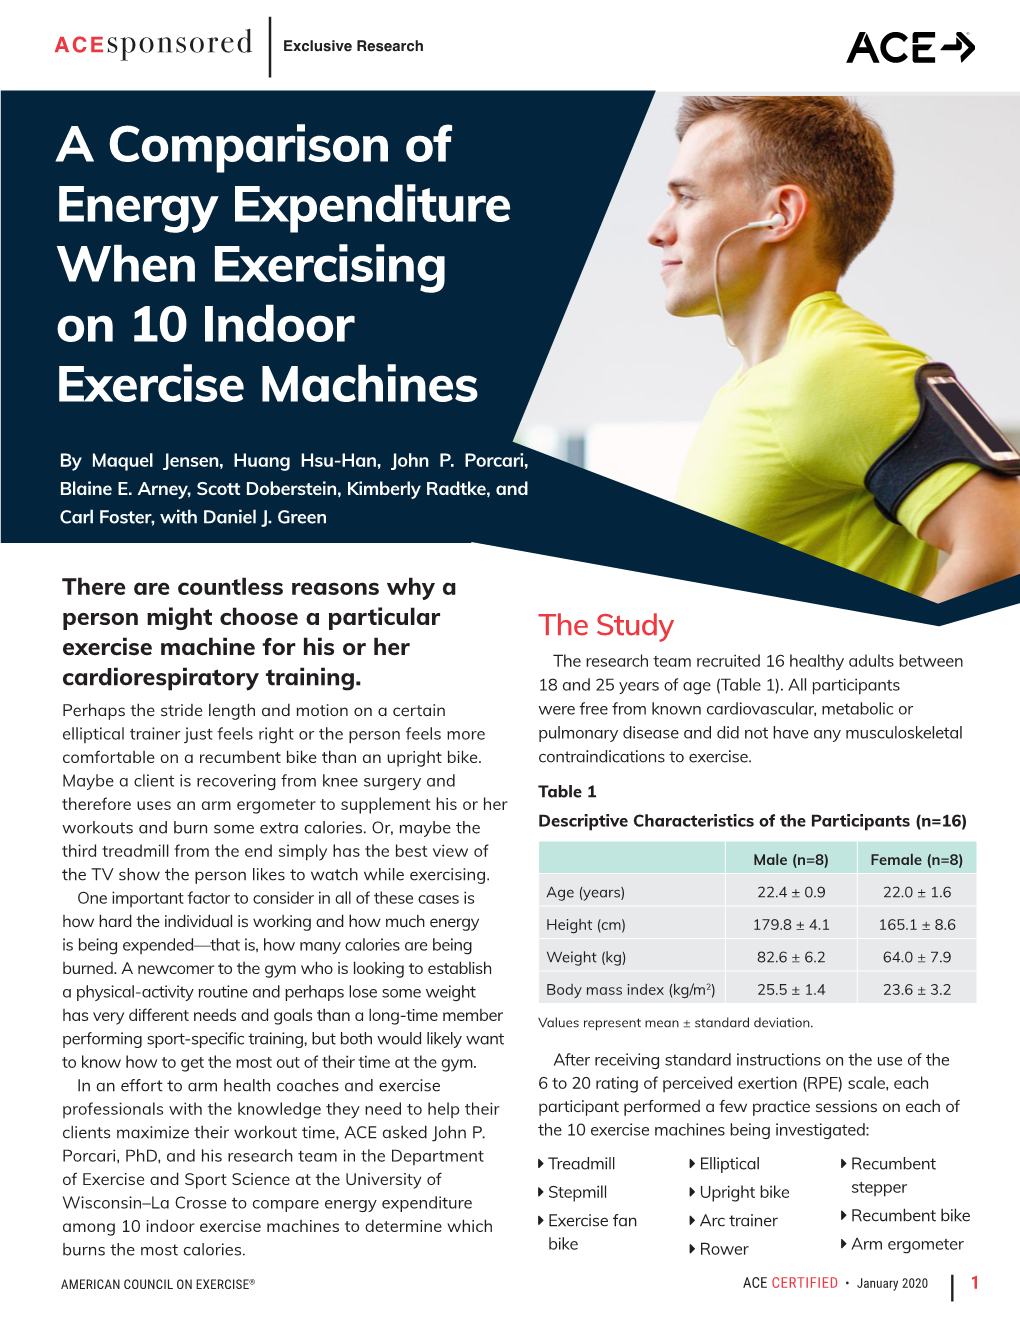 A Comparison of Energy Expenditure When Exercising on 10 Indoor Exercise Machines